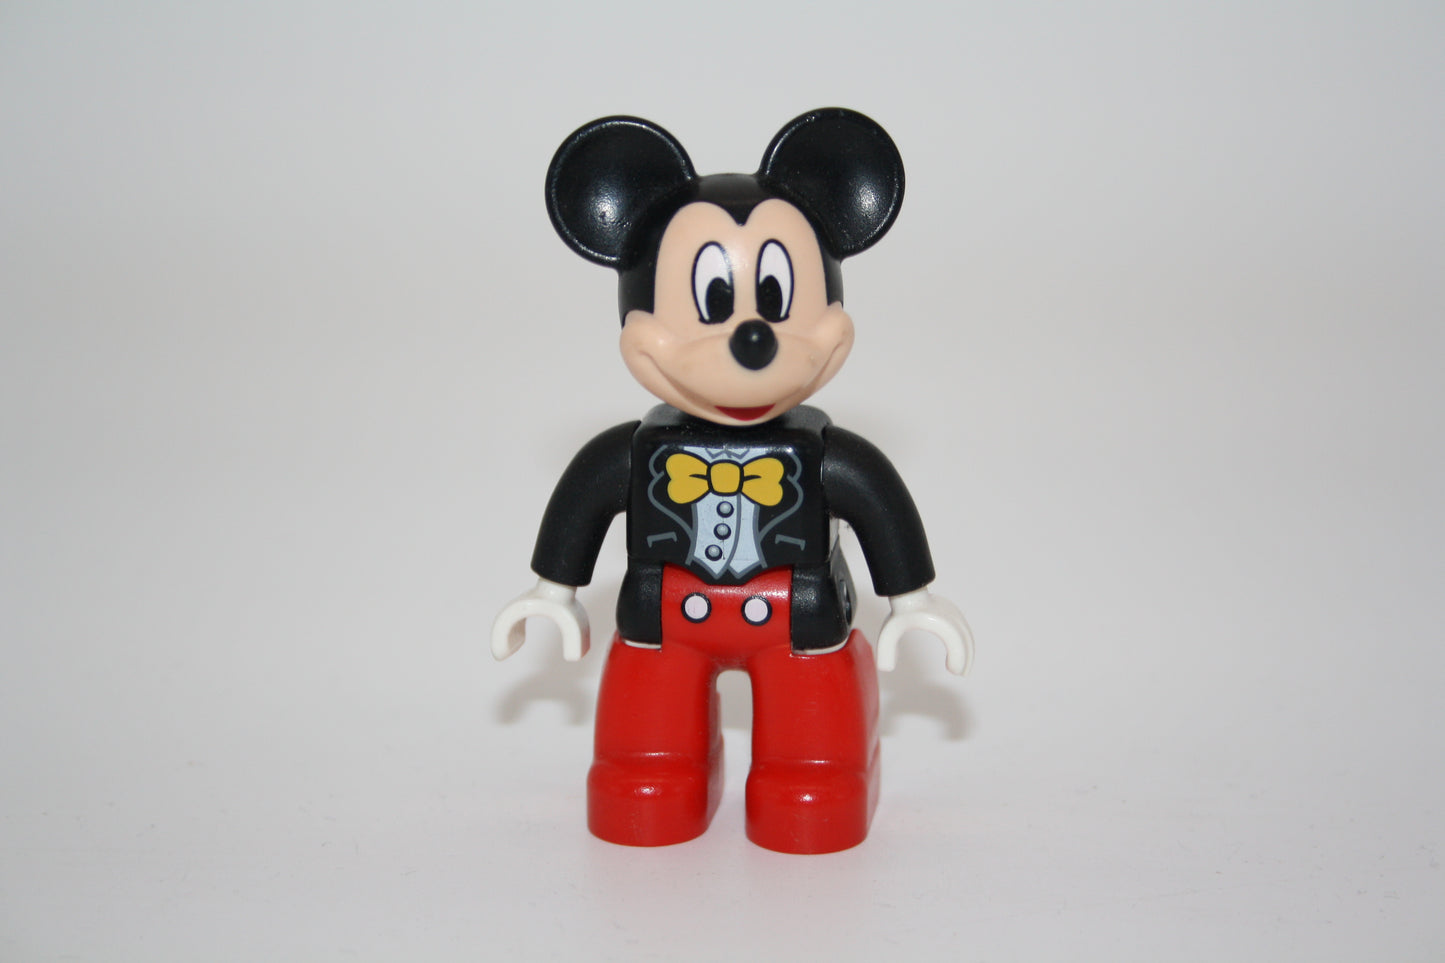 Duplo - Micky Maus/Mickey Mouse in Jacket - Disney Figur - neue Serie